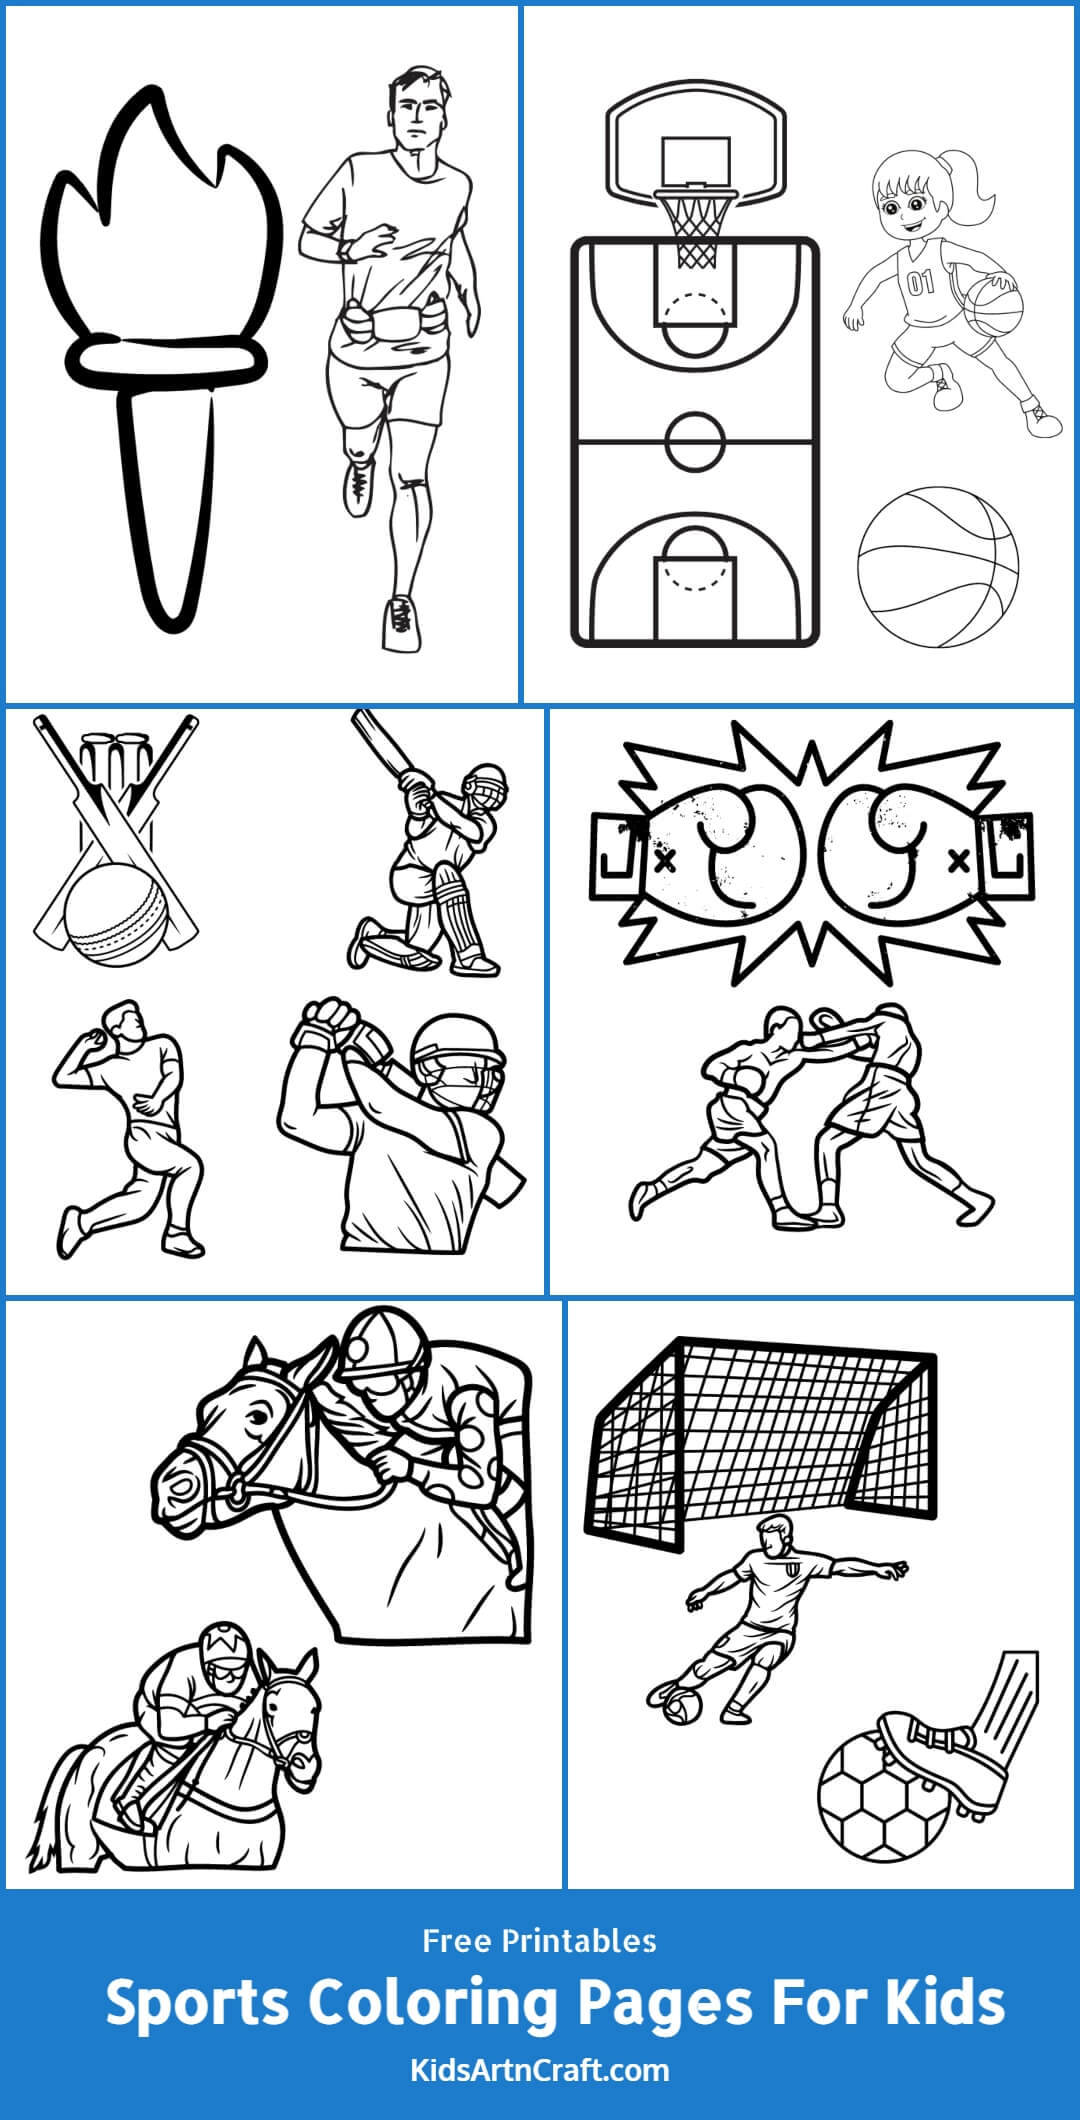 Sports Coloring Pages For Kids – Free Printables